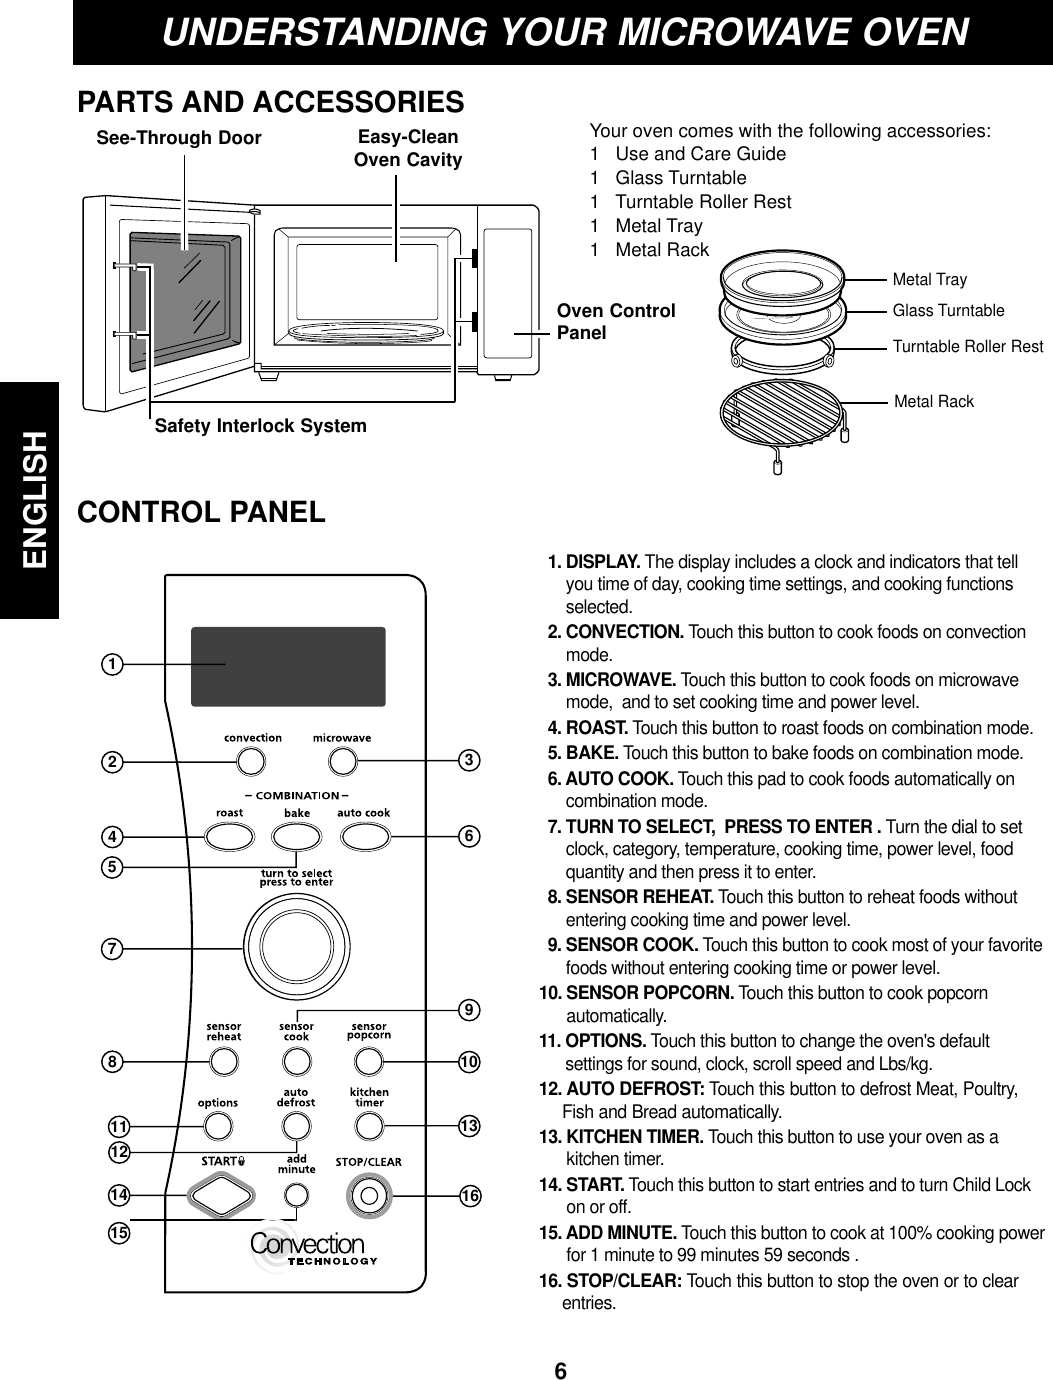 Your oven comes with the following accessories:1   Use and Care Guide1   Glass Turntable1   Turntable Roller Rest1   Metal Tray1   Metal Rack6ENGLISHUNDERSTANDING YOUR MICROWAVE OVENPARTS AND ACCESSORIESCONTROL PANELEasy-CleanOven CavitySee-Through DoorSafety Interlock SystemOven ControlPanelGlass TurntableMetal TrayTurntable Roller RestMetal Rack369101316124578111214151. DISPLAY. The display includes a clock and indicators that tellyou time of day, cooking time settings, and cooking functionsselected.2. CONVECTION. Touch this button to cook foods on convectionmode.3. MICROWAVE. Touch this button to cook foods on microwavemode,  and to set cooking time and power level.4. ROAST. Touch this button to roast foods on combination mode.5. BAKE. Touch this button to bake foods on combination mode.6. AUTO COOK. Touch this pad to cook foods automatically oncombination mode.7. TURN TO SELECT,  PRESS TO ENTER . Turn the dial to setclock, category, temperature, cooking time, power level, foodquantity and then press it to enter.8. SENSOR REHEAT. Touch this button to reheat foods withoutentering cooking time and power level.9. SENSOR COOK. Touch this button to cook most of your favoritefoods without entering cooking time or power level.10. SENSOR POPCORN. Touch this button to cook popcornautomatically.11. OPTIONS. Touch this button to change the oven&apos;s defaultsettings for sound, clock, scroll speed and Lbs/kg.12. AUTO DEFROST: Touch this button to defrost Meat, Poultry,Fish and Bread automatically.13. KITCHEN TIMER. Touch this button to use your oven as a kitchen timer.14. START. Touch this button to start entries and to turn Child Lockon or off.15. ADD MINUTE. Touch this button to cook at 100% cooking powerfor 1 minute to 99 minutes 59 seconds .16. STOP/CLEAR: Touch this button to stop the oven or to clearentries.